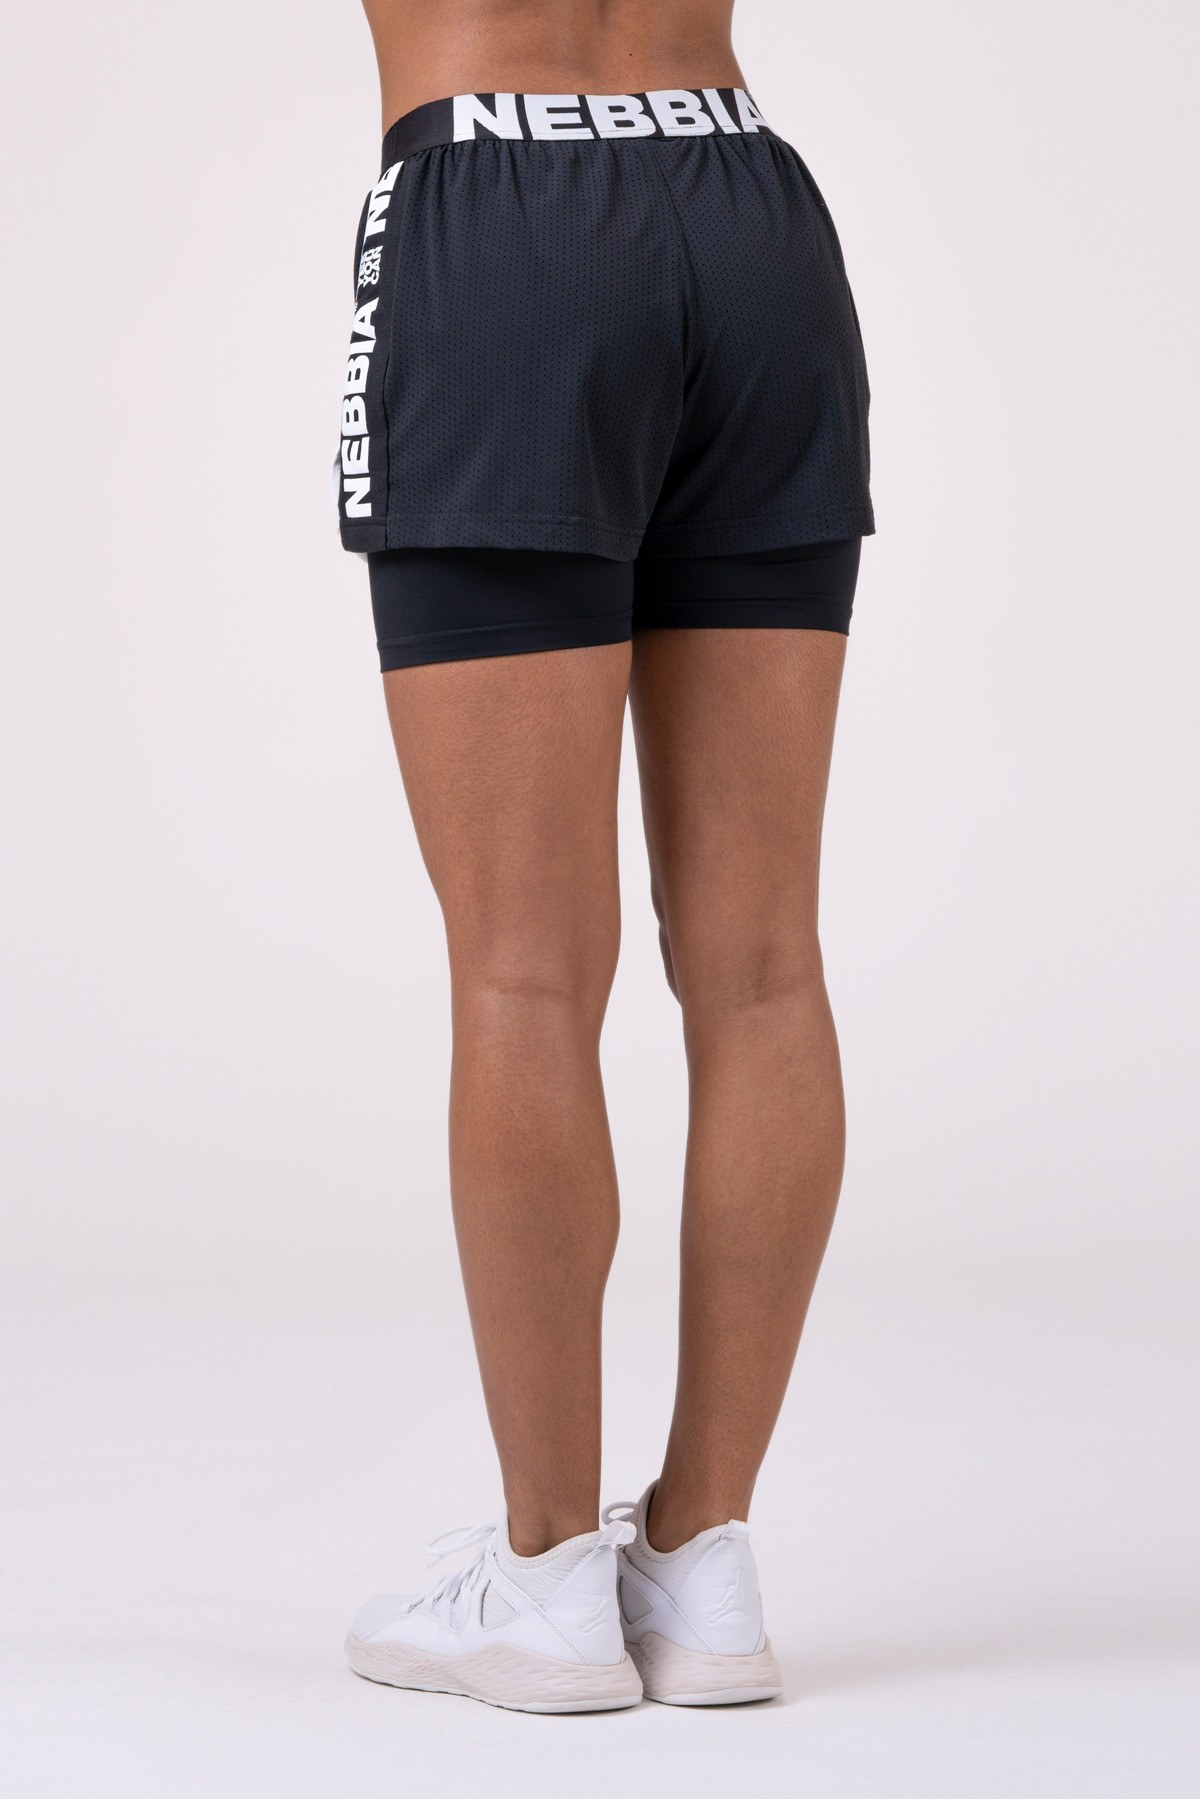 NEBBIA Fast&Furious Double Layer shorts Black 527